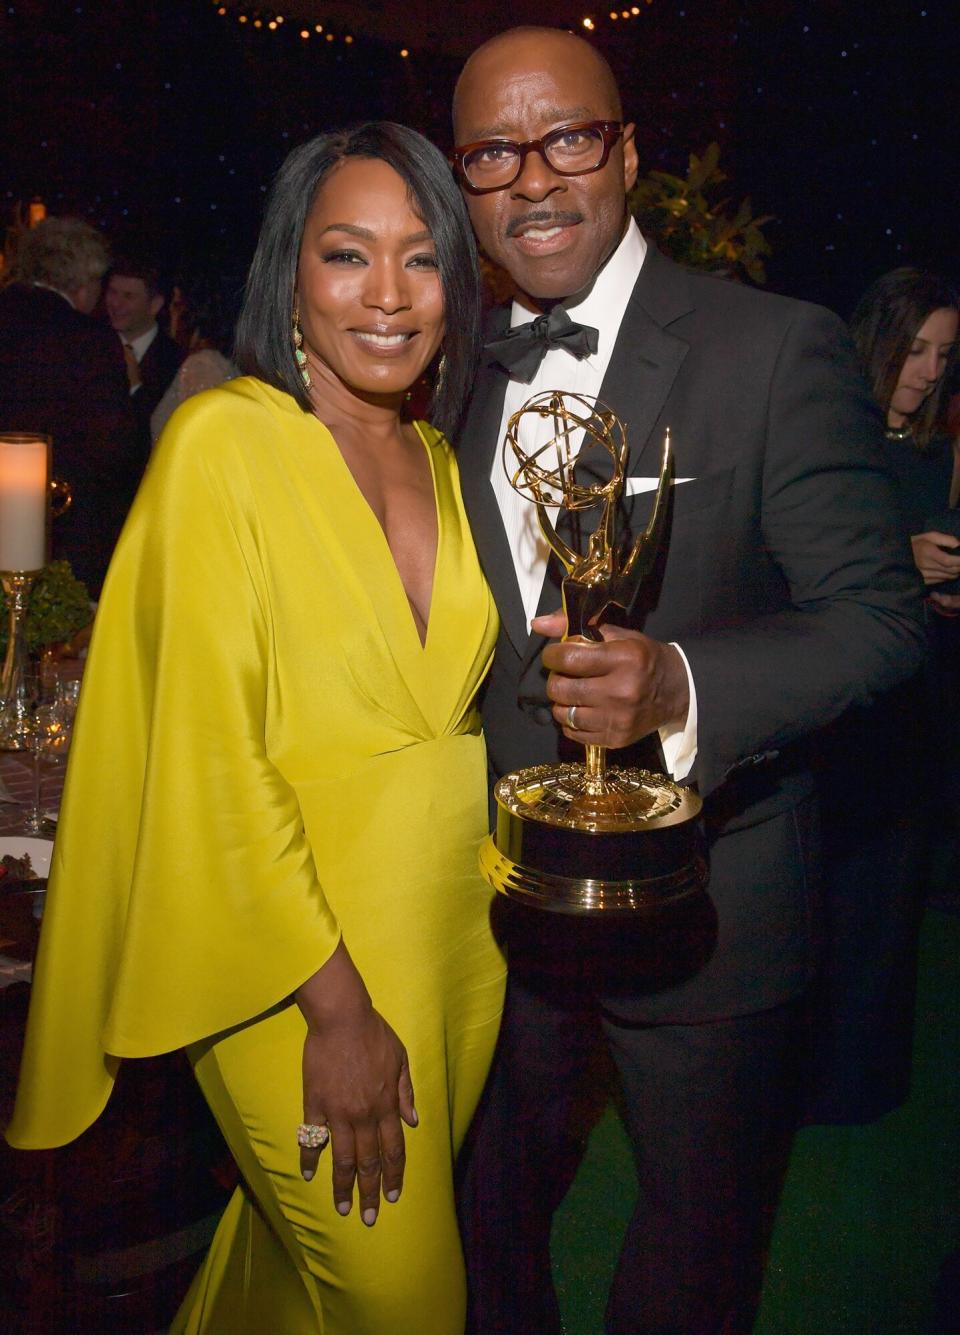 Courtney B. Vance (R), winner of the award for Outstanding Lead Actor in a Limited Series or Movie for 'The People vs. OJ Simpson: American Crime Story,' and actress Angela Bassett attend the 68th Annual Primetime Emmy Awards Governors Ball at Microsoft Theater on September 18, 2016 in Los Angeles, California